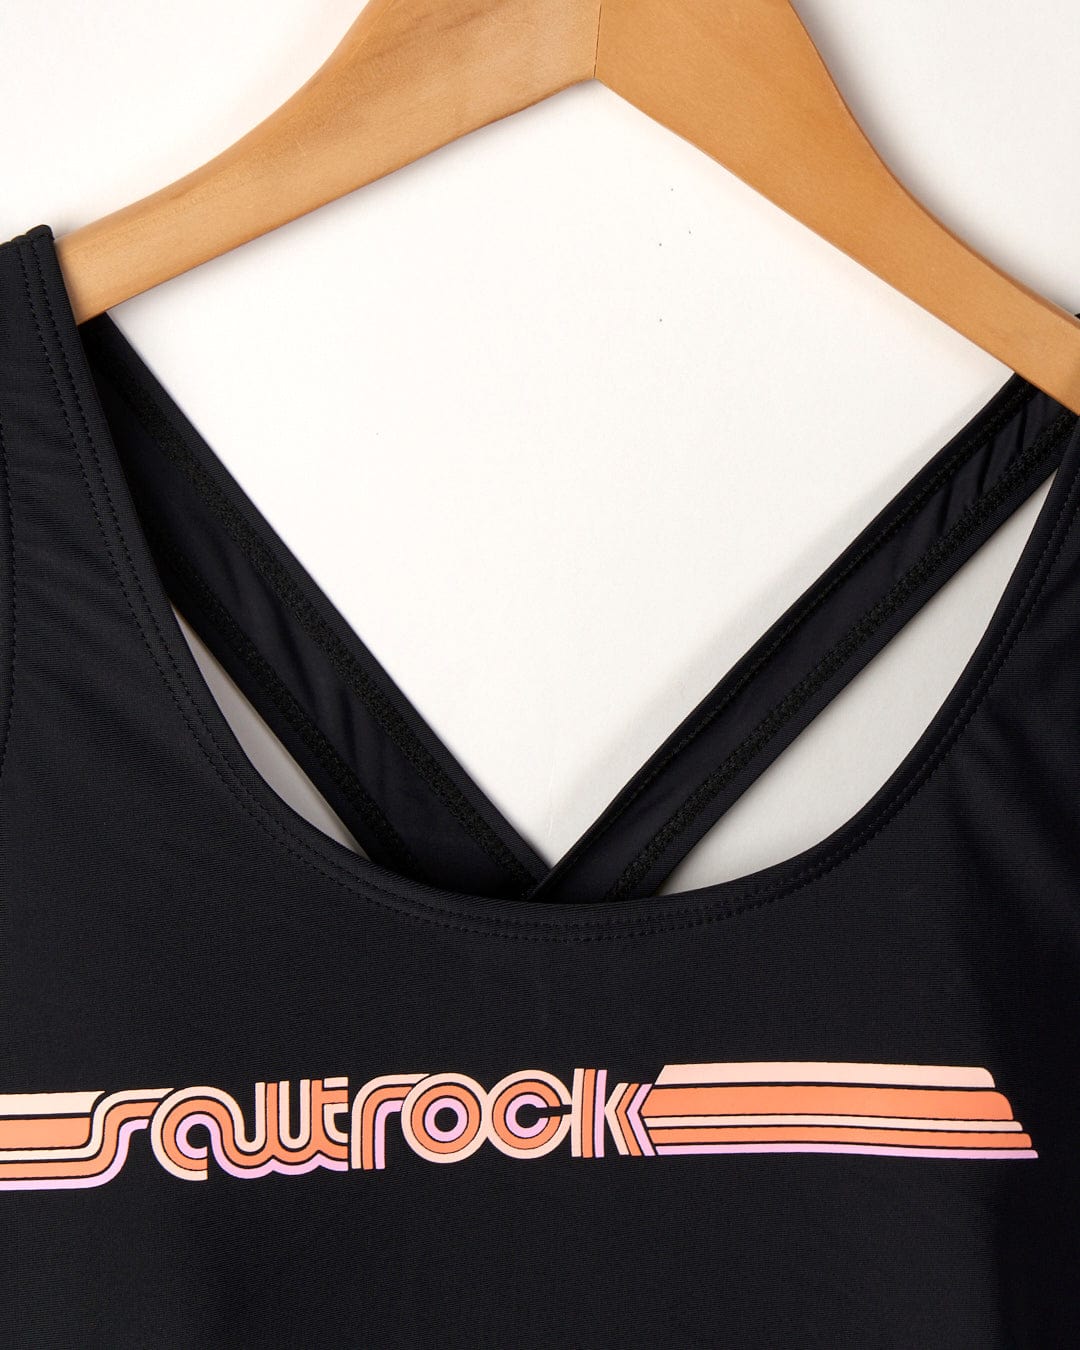 Close-up of a Corrine Retro swimsuit in black made from recycled fibers with the word "Saltrock" and three horizontal stripes in pink and orange, displayed on a hanger against a white background.